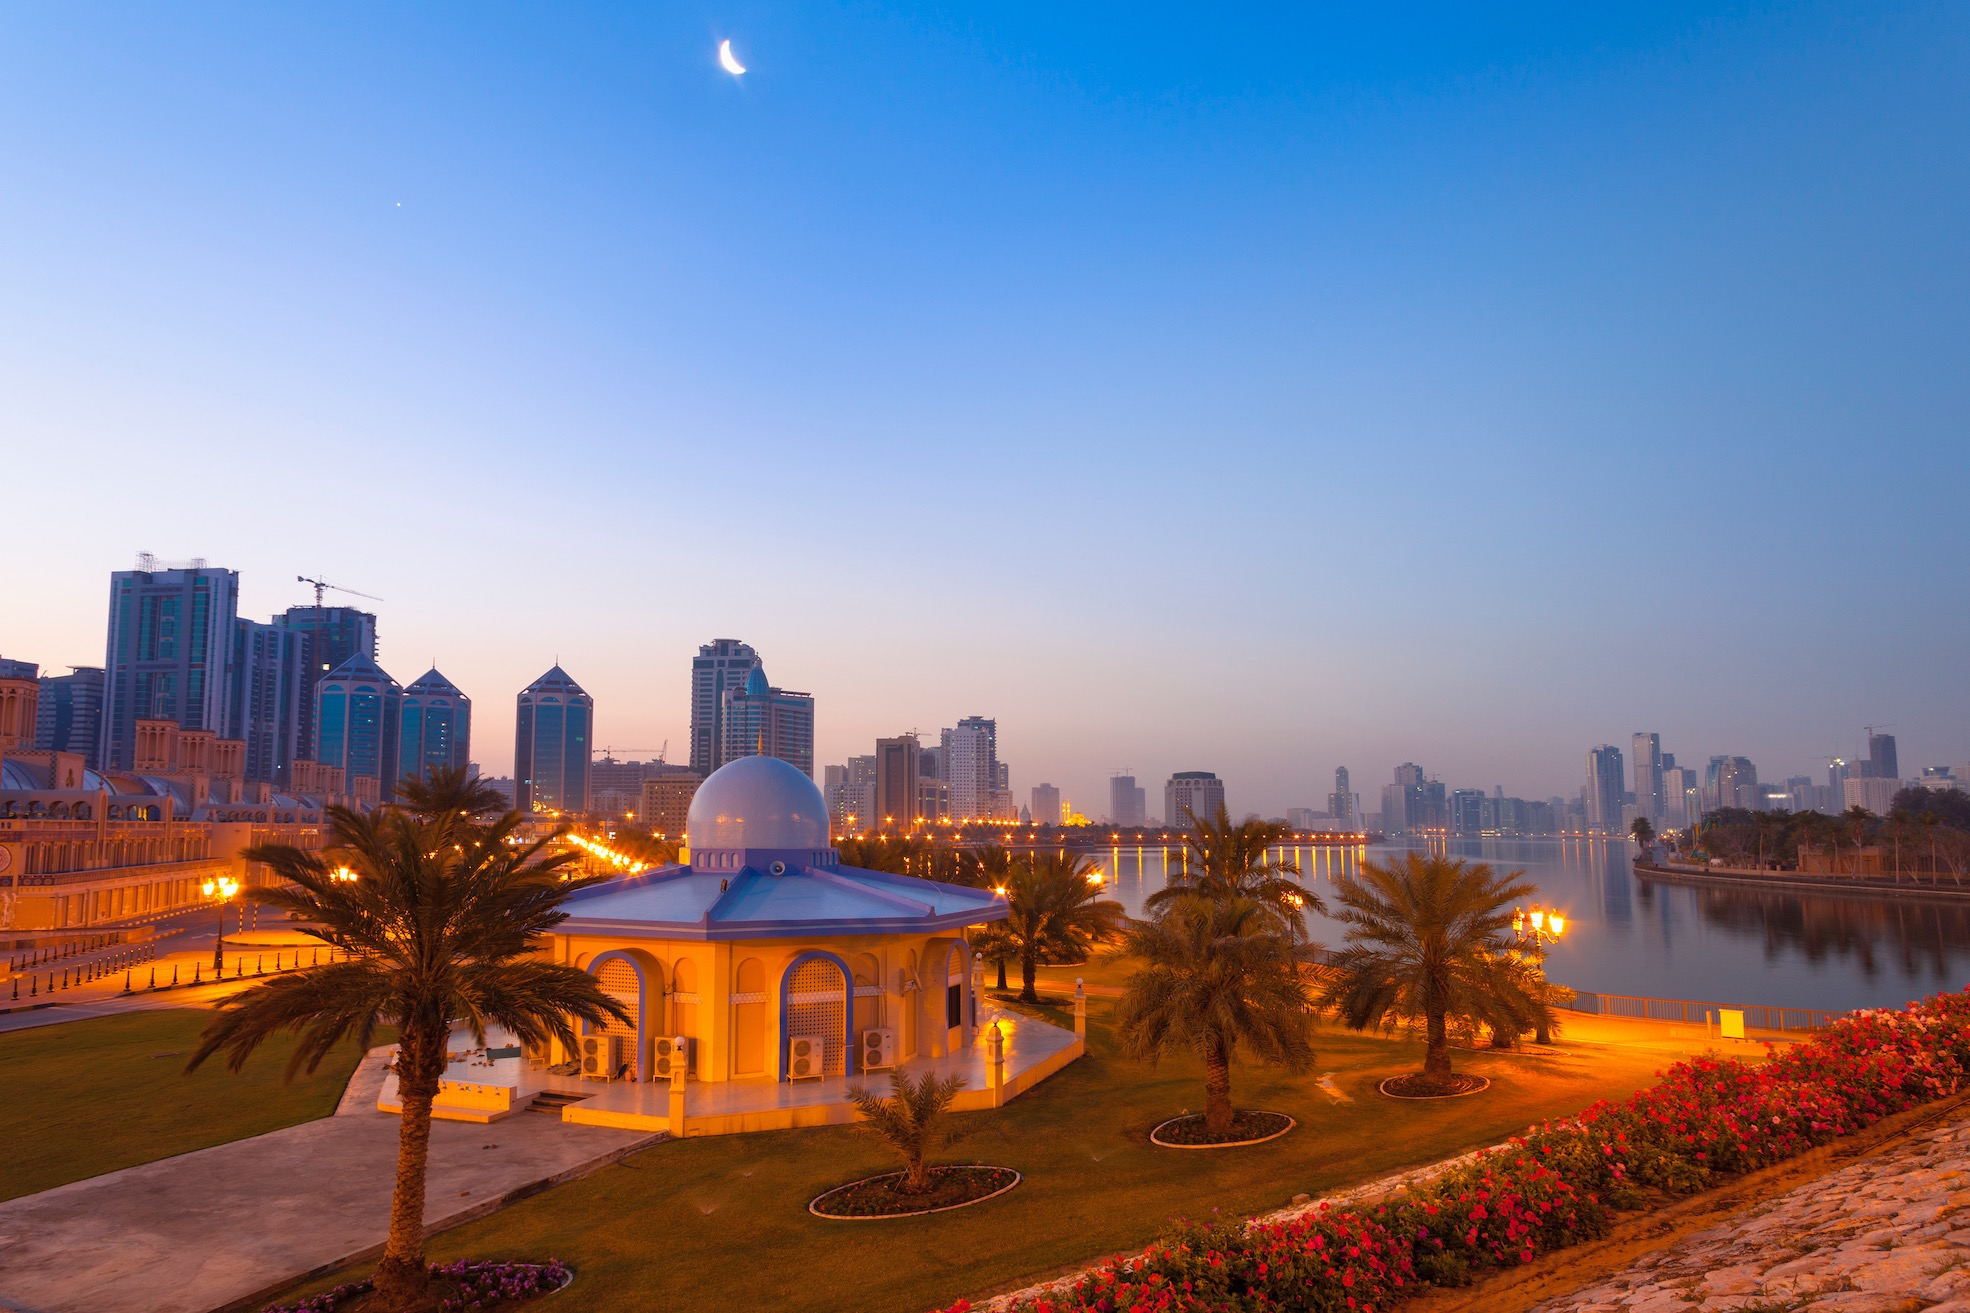 An image of Sharjah.